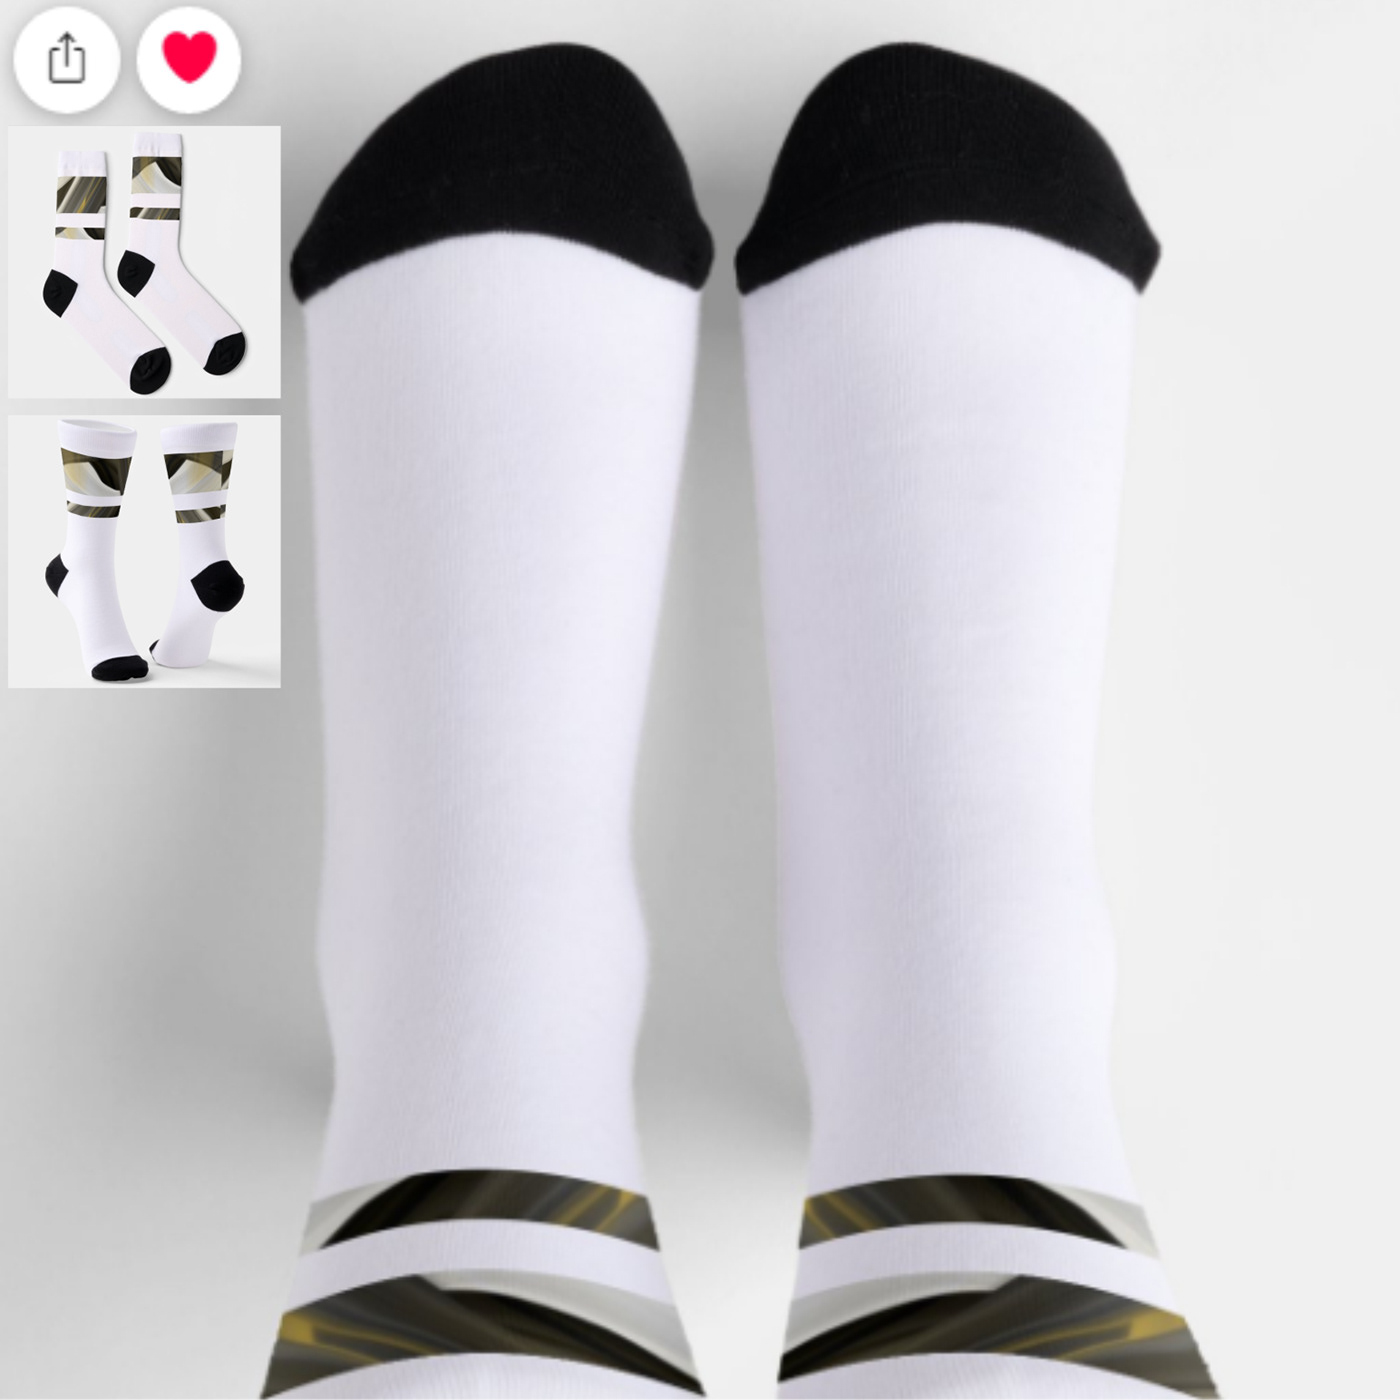 accessories abstraction stylist props clothing brand fashion accessory trend socks Abstract Art popular